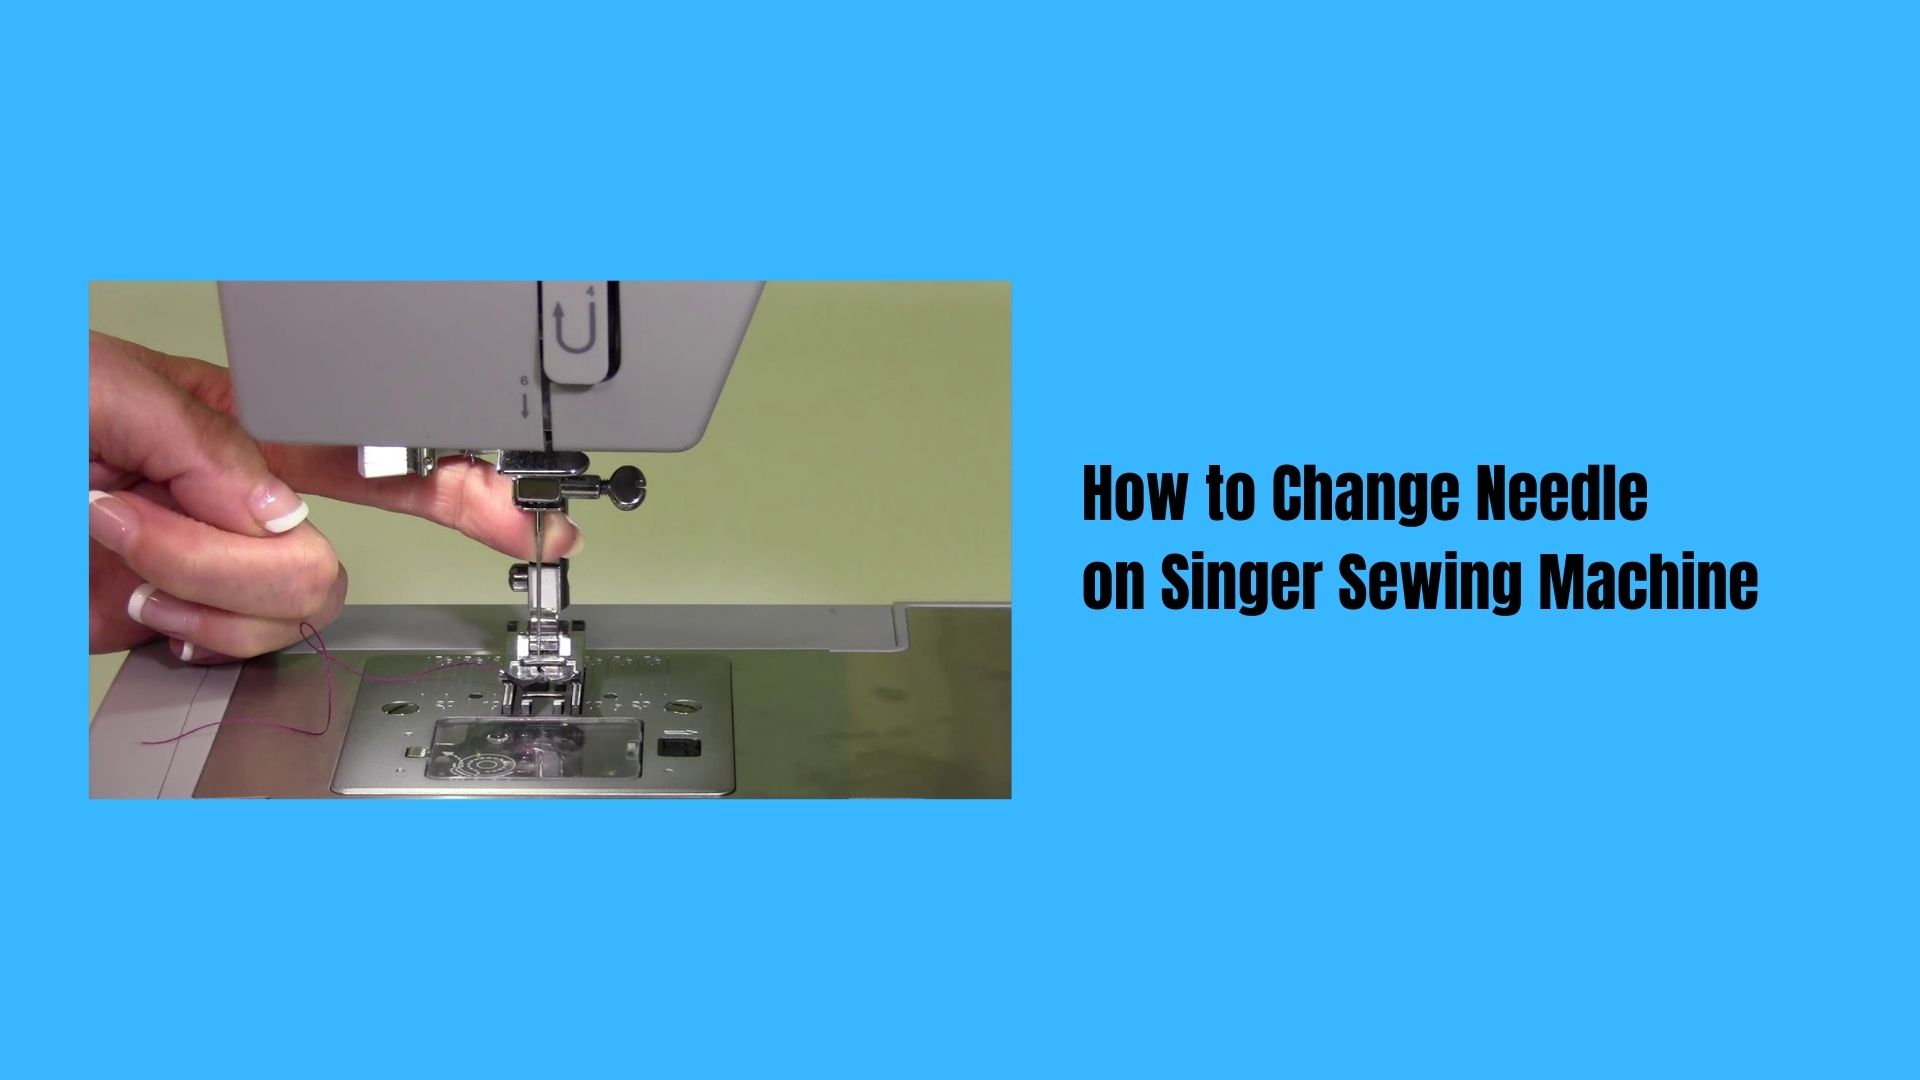 How to Change Needle on Singer Sewing Machine